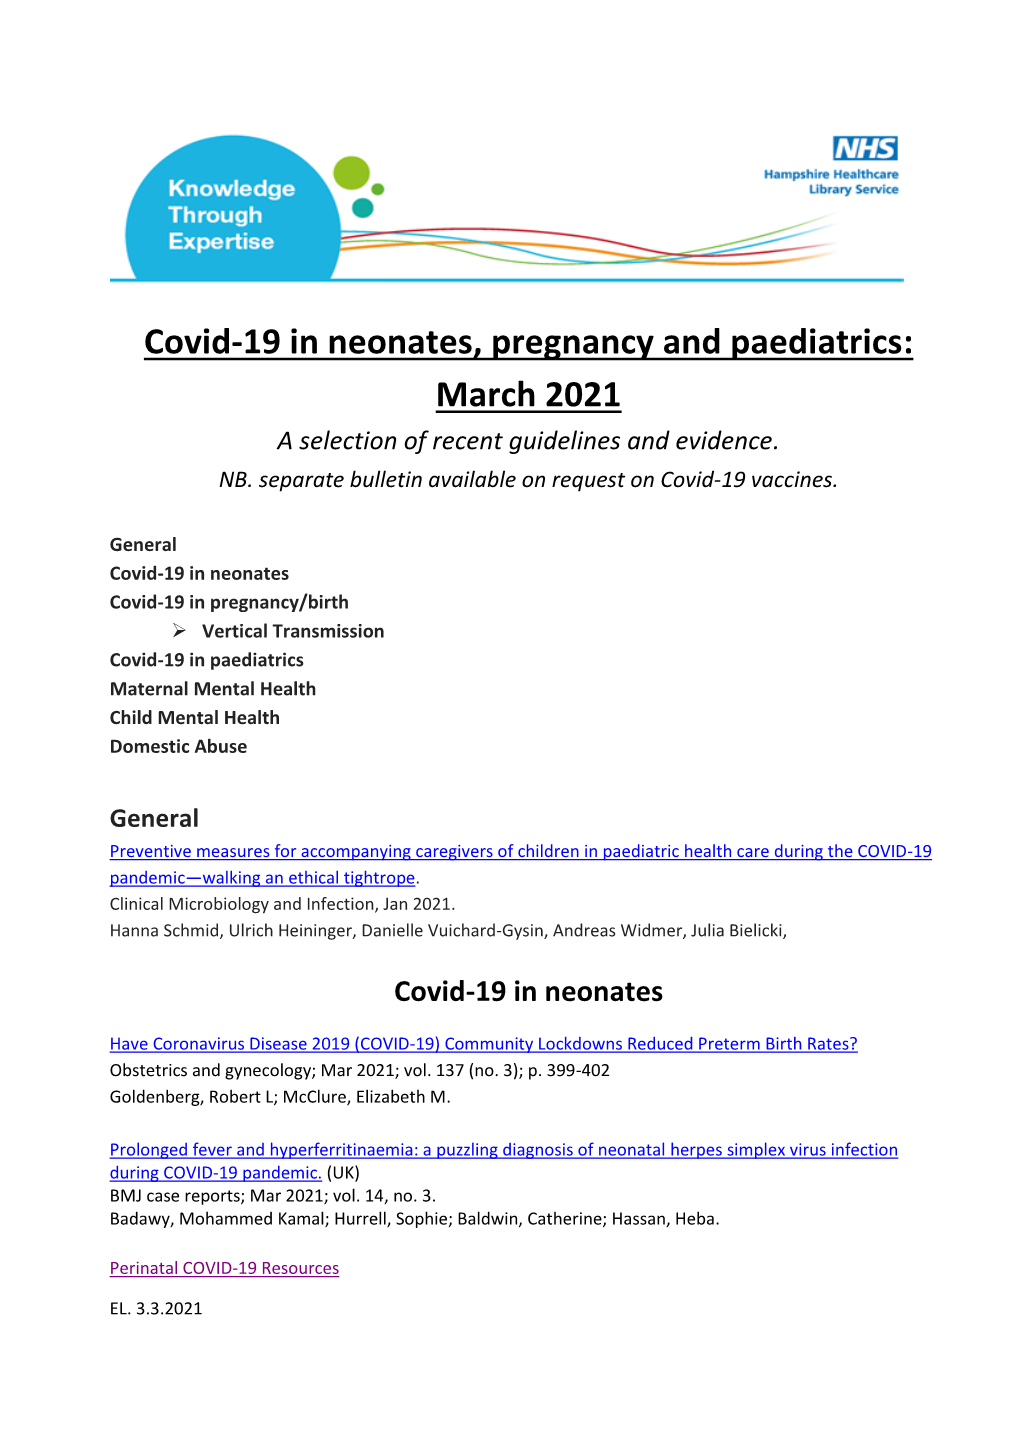 Covid-19 in Neonates, Pregnancy and Paediatrics: March 2021 a Selection of Recent Guidelines and Evidence